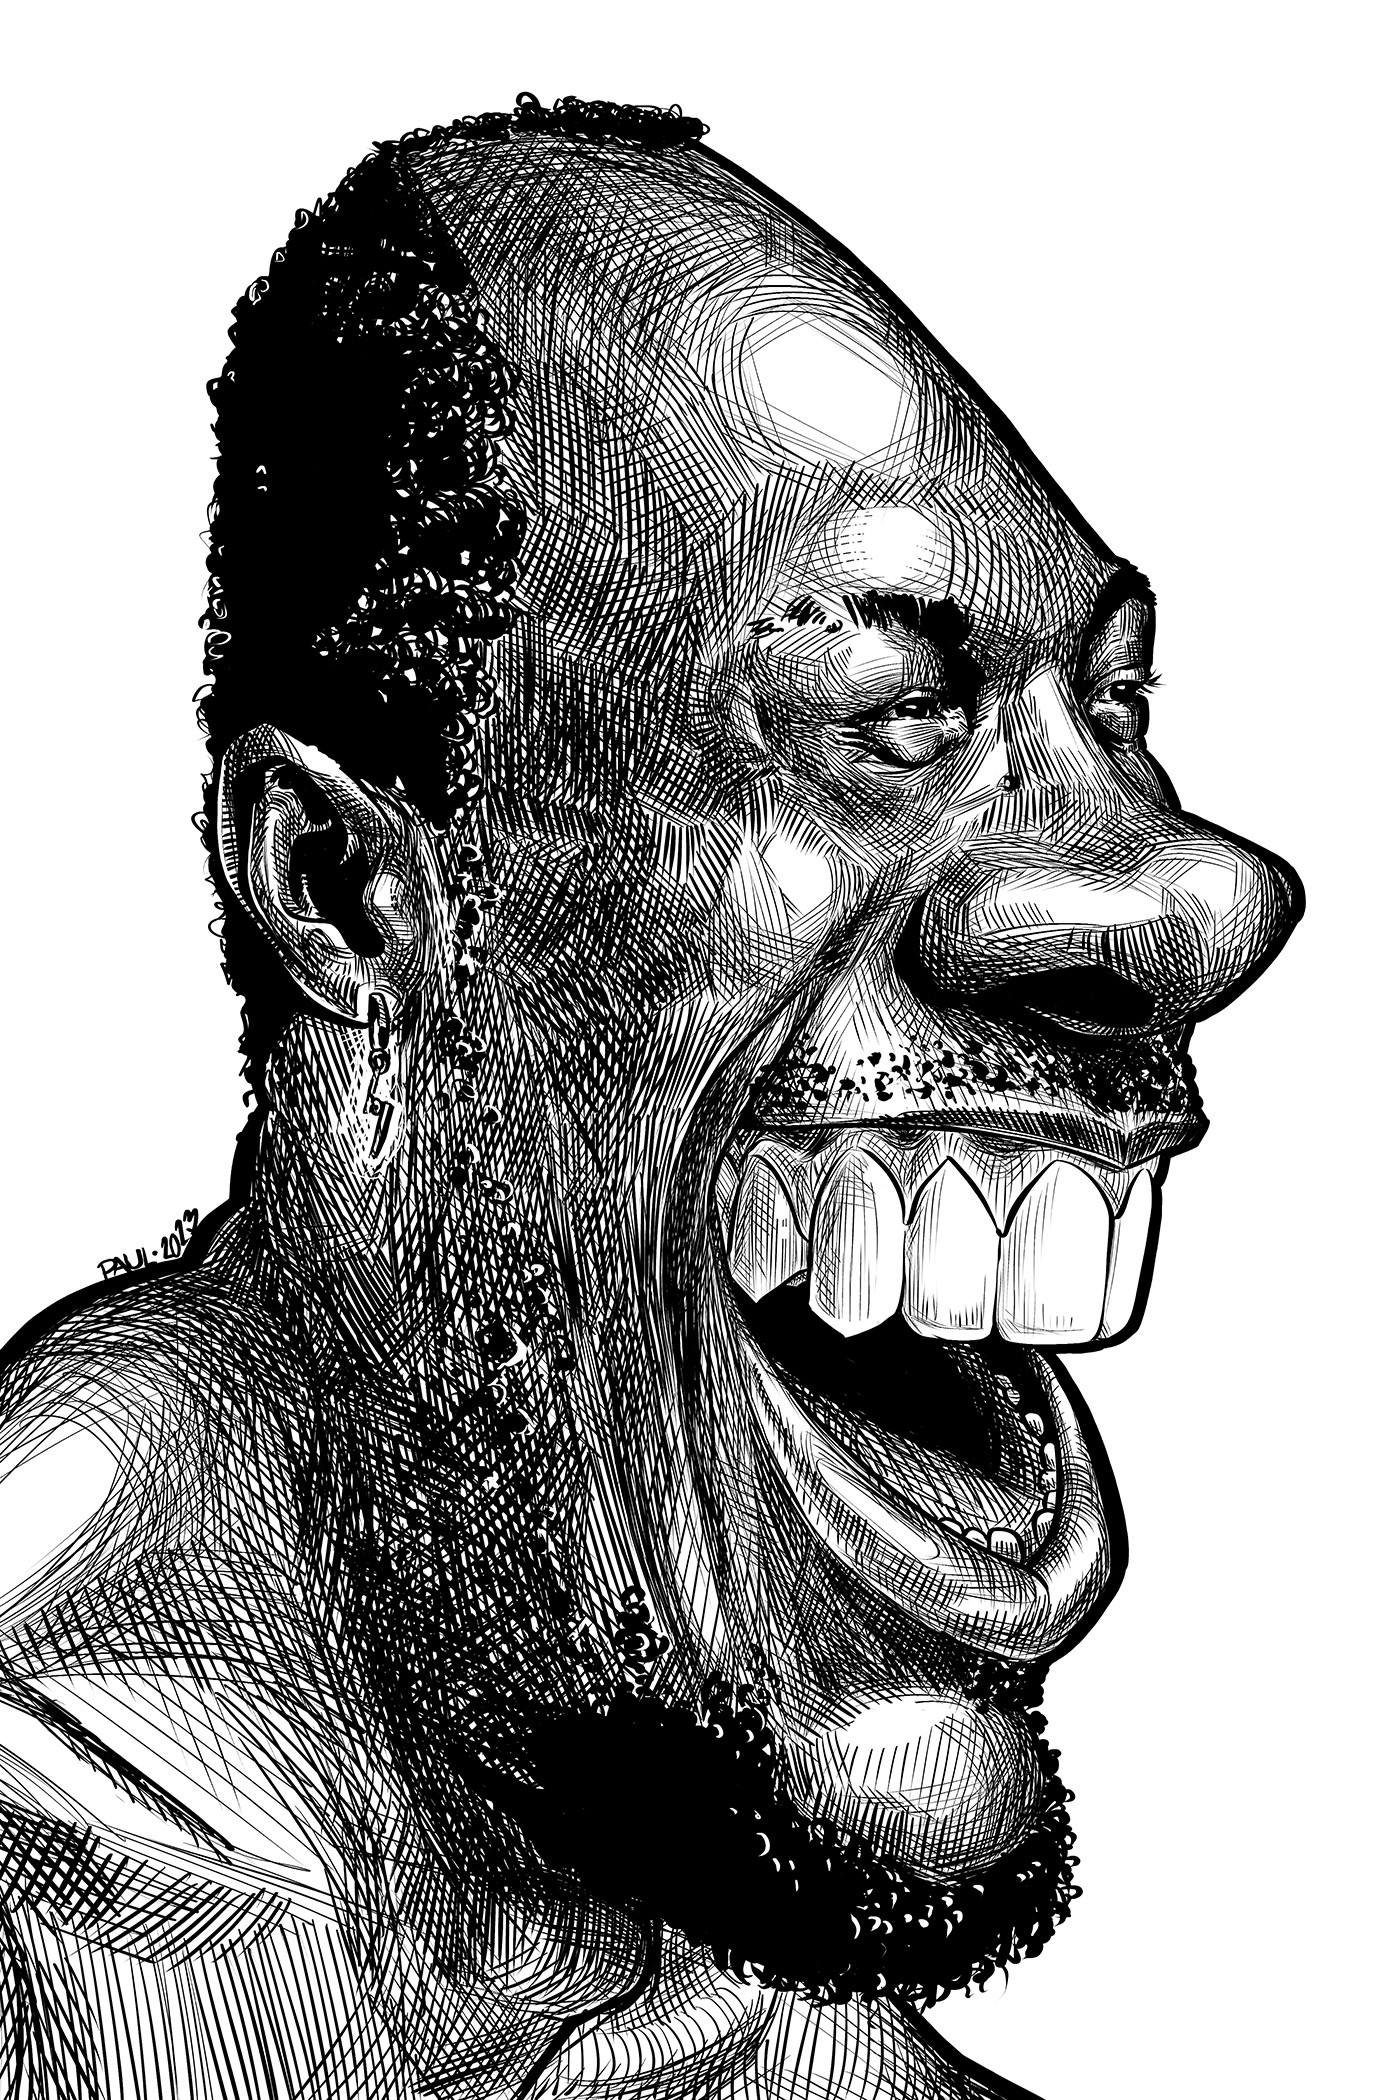 A black and white caricature of an black man with a big smile.